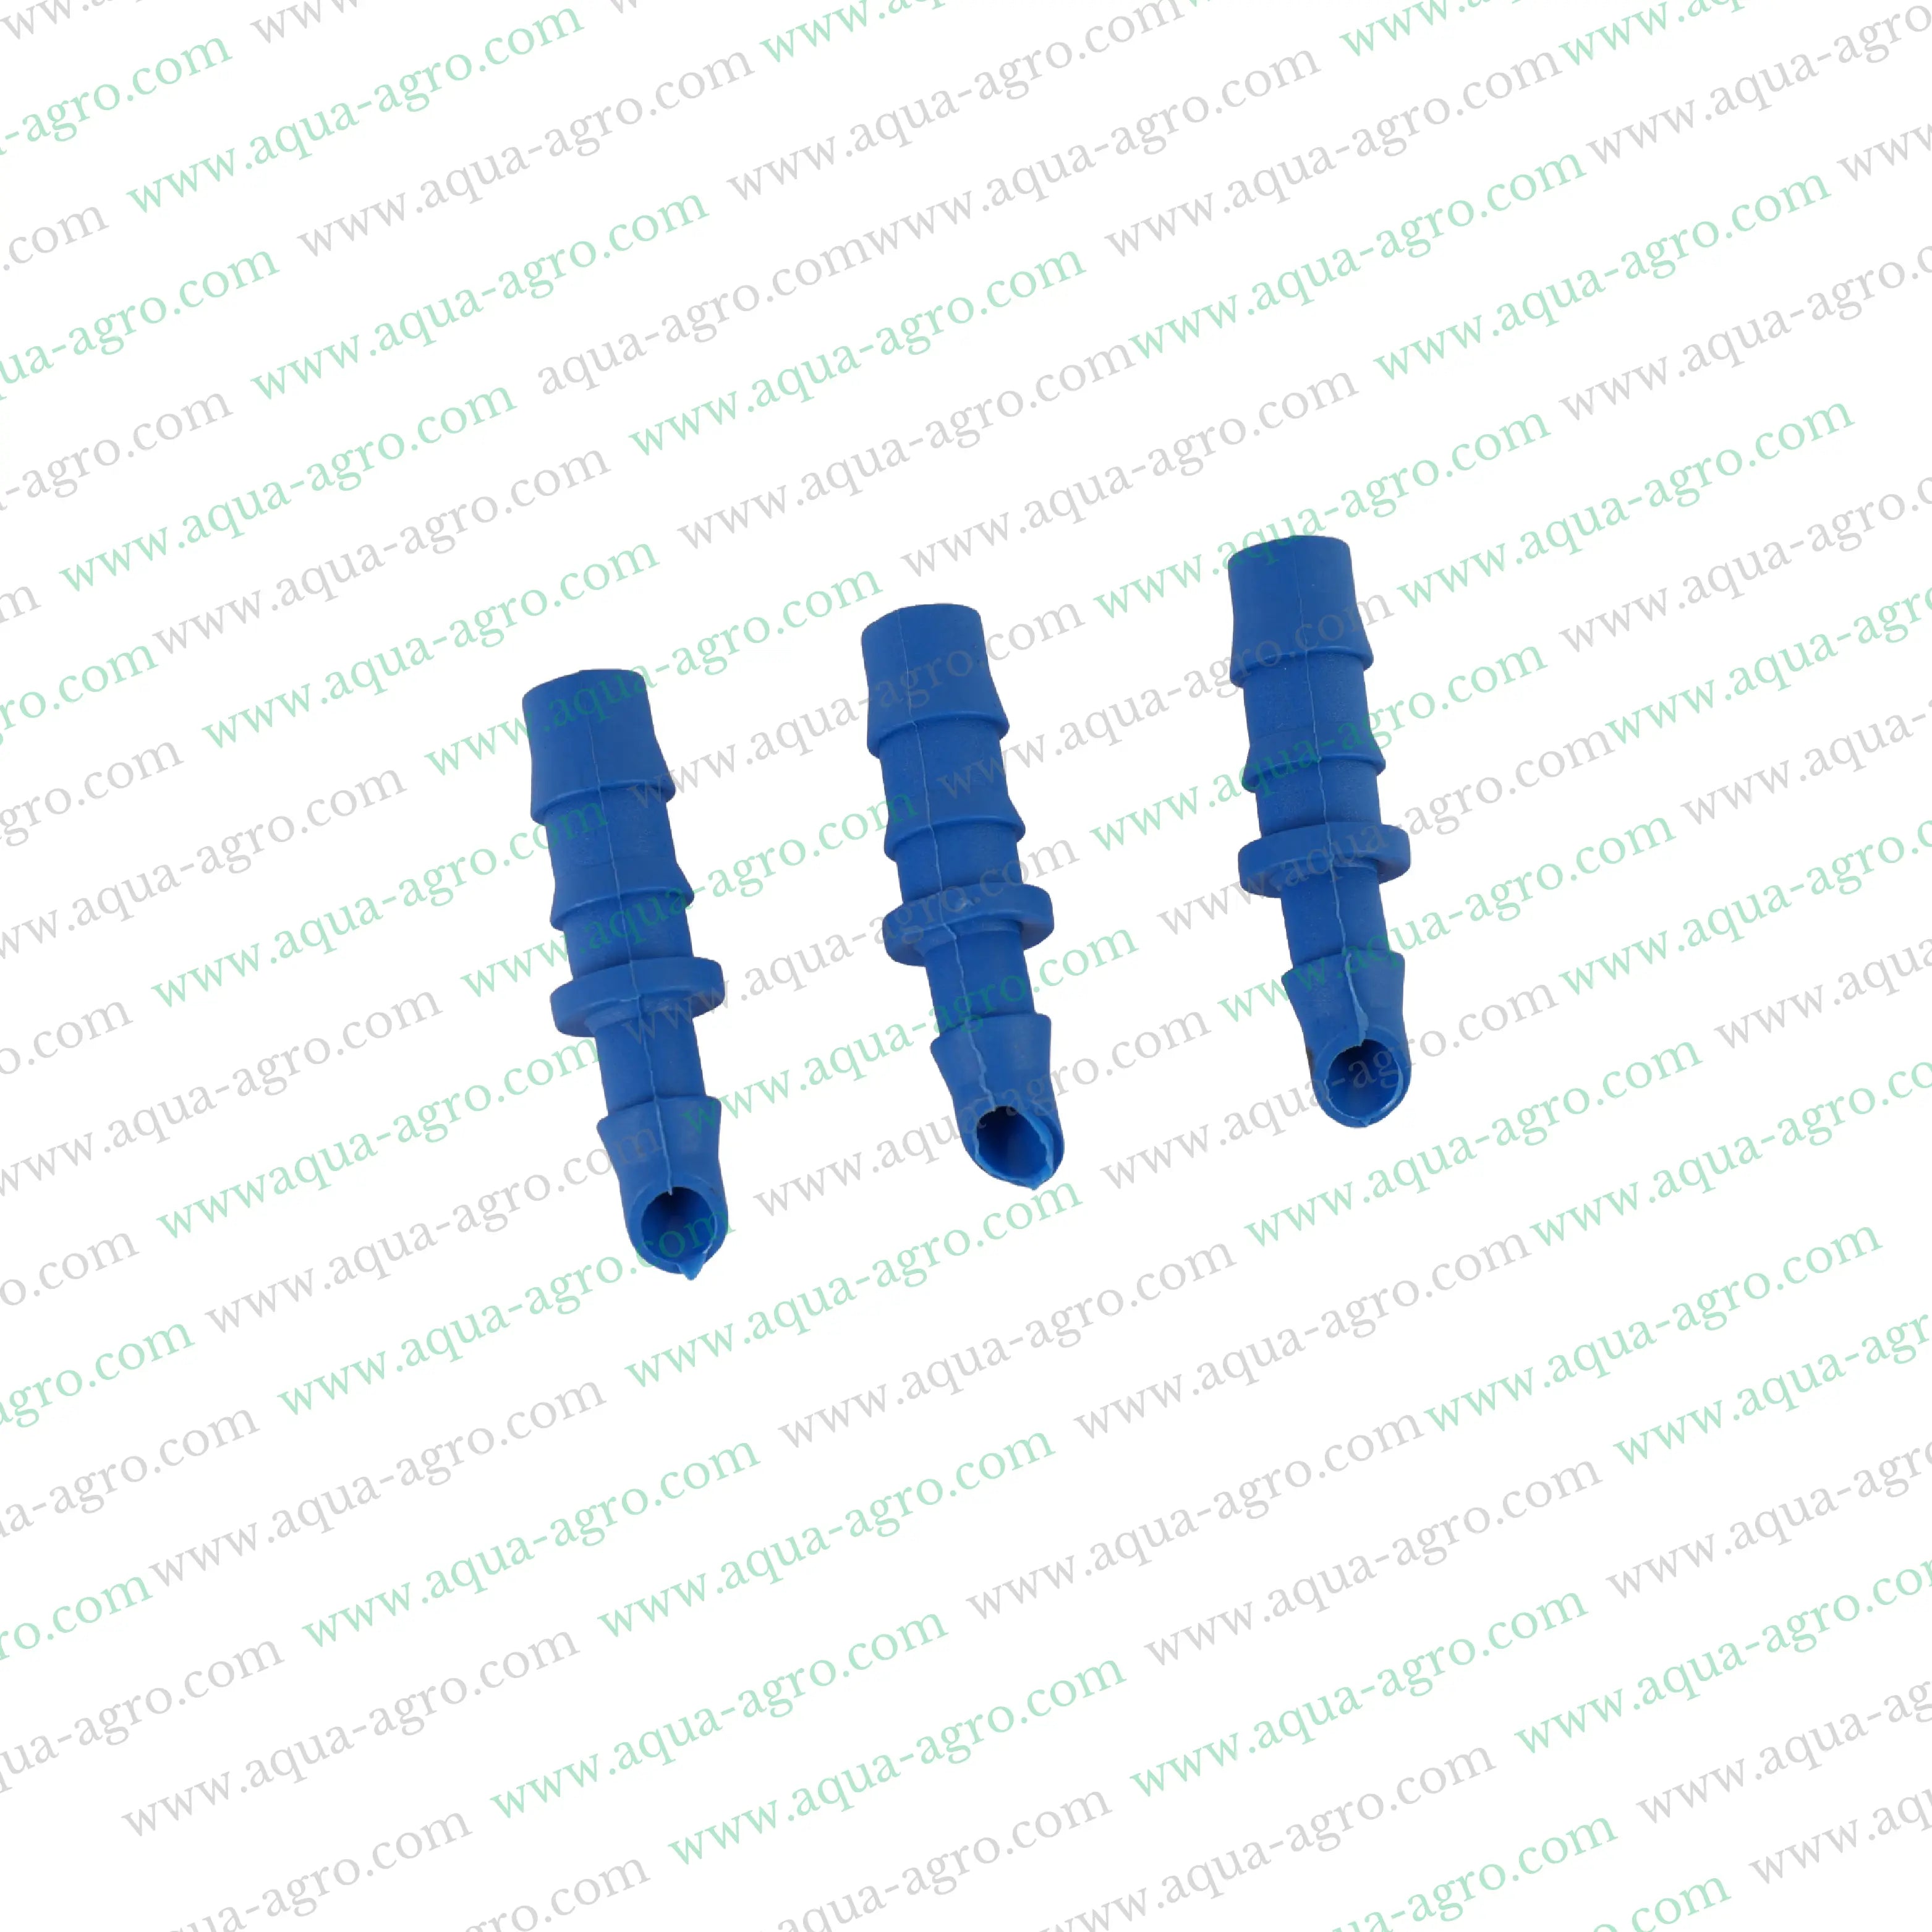 AQUA - AGRO | Drip Fittings And Accessories - Barbed Fittings - Lite - Start Connector - 12mm